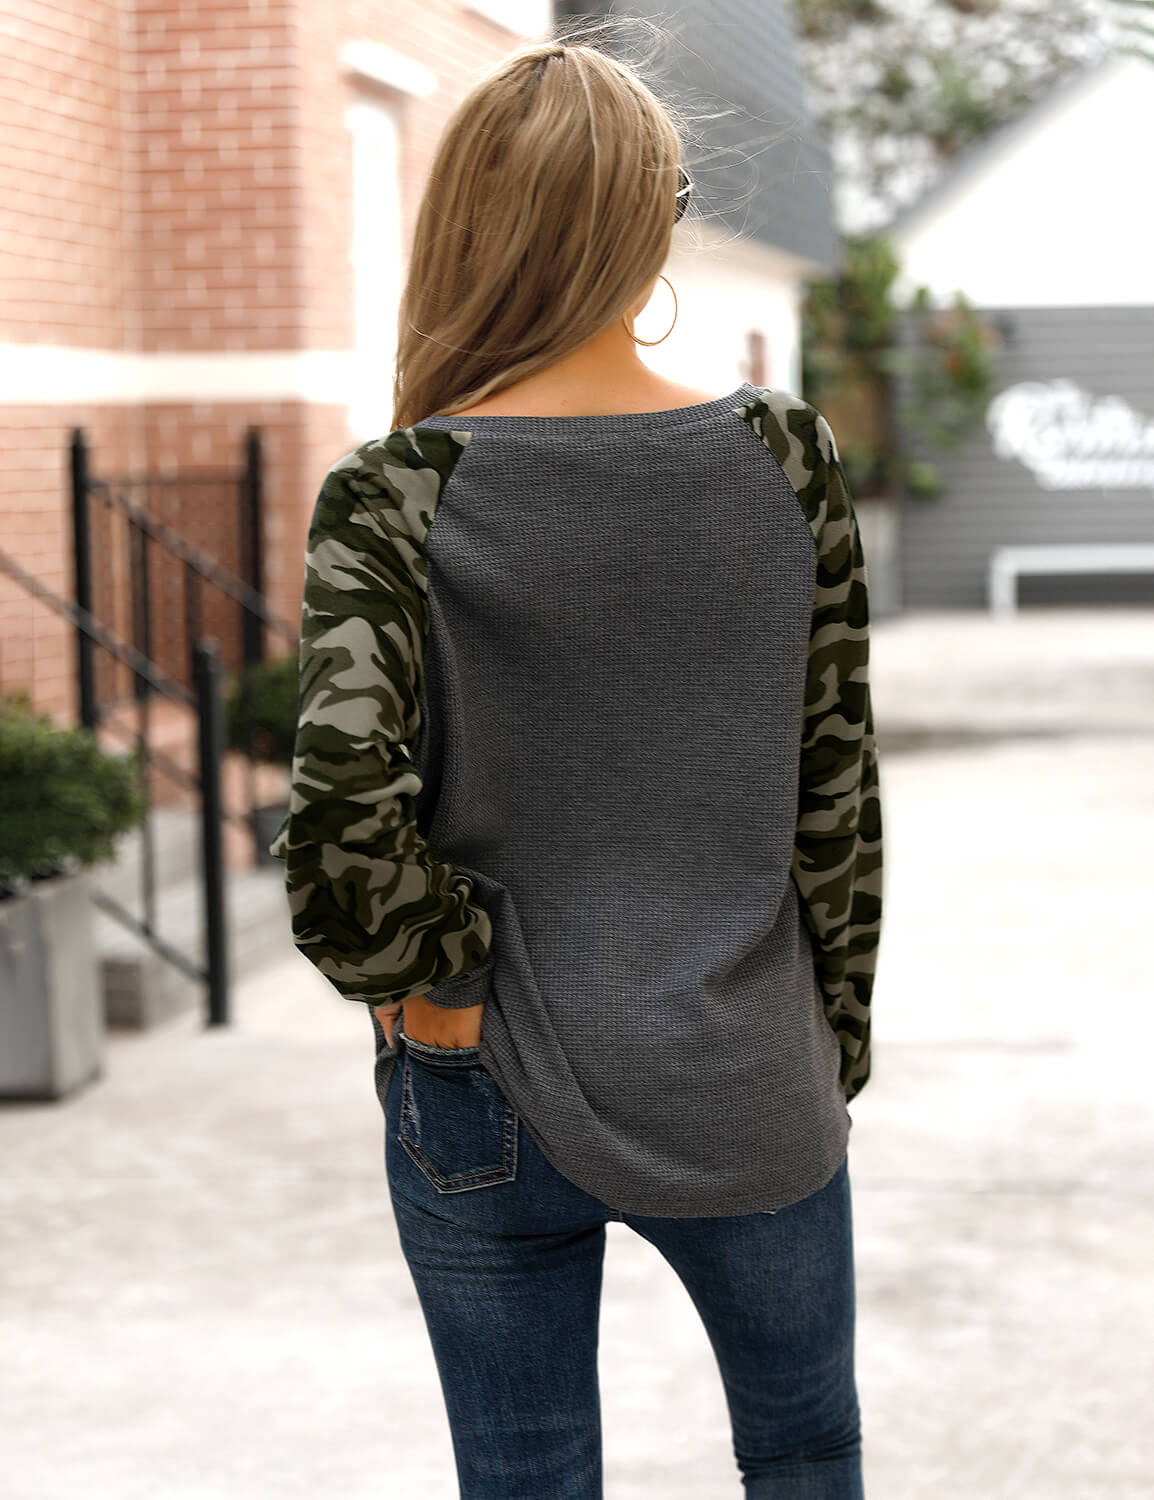 Blooming Jelly_Street Style Camo Long Sleeve T-Shirt_Camo Print_152709_07_2020 Women Fashion Outfits_Tops_T-Shirt